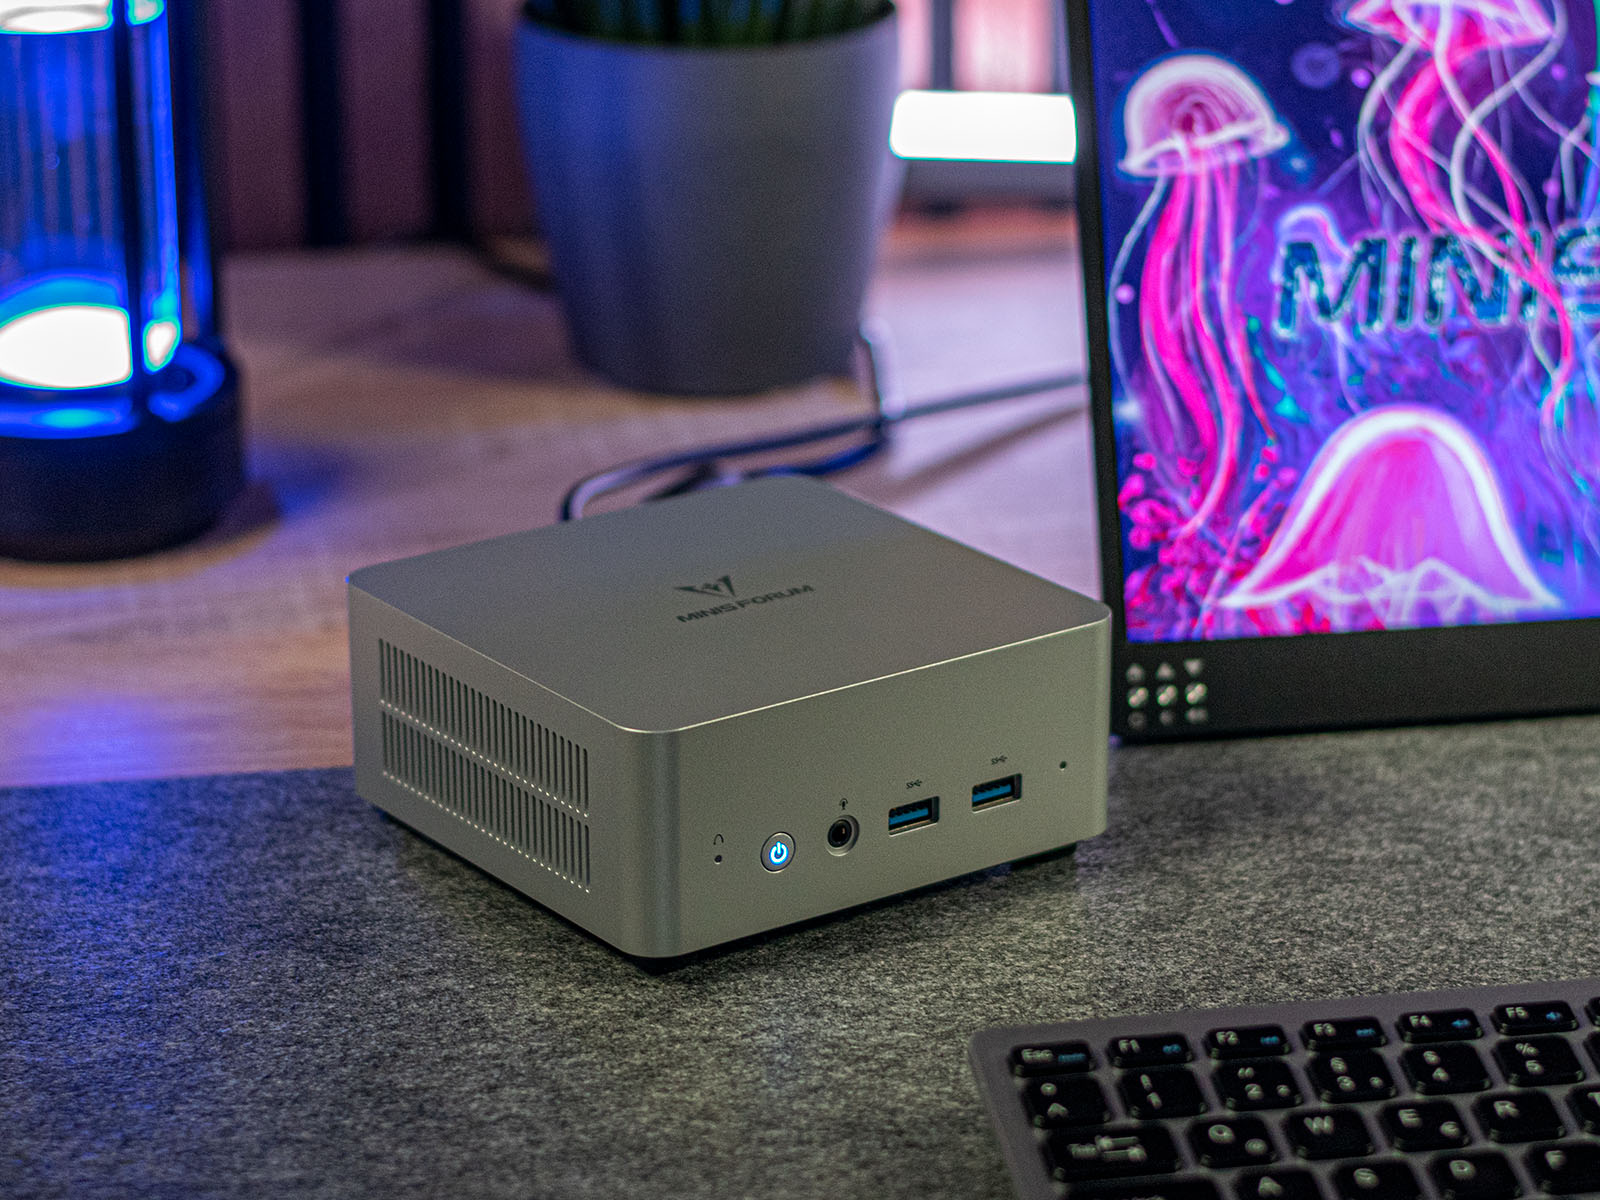 Minisforum Venus Series UN1245 review: A powerful mini PC with an Intel  Core i5-12450H starting at $310 -  Reviews